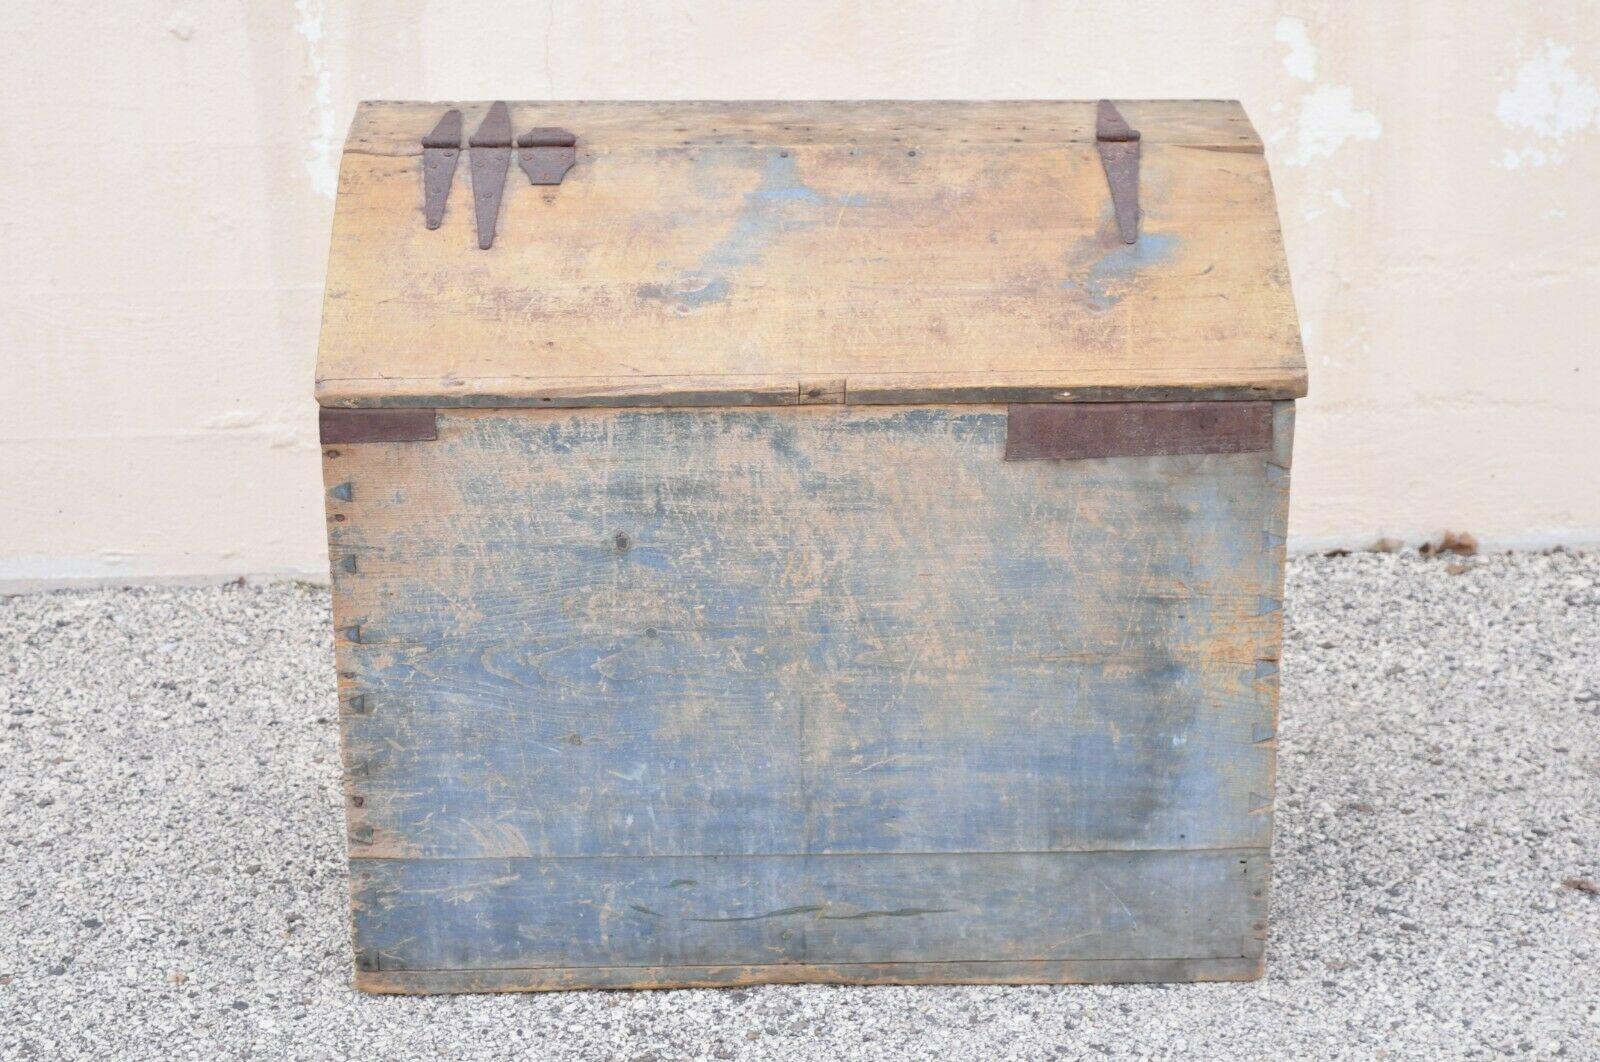 Antique Blue Distress Painted Primitive Grain Bin Blanket Chest Trunk. Item features a blue distress painted finish, lift top, solid wood construction, very nice antique item, great style and form. Circa Late 19th Century. Measurements: 31.5